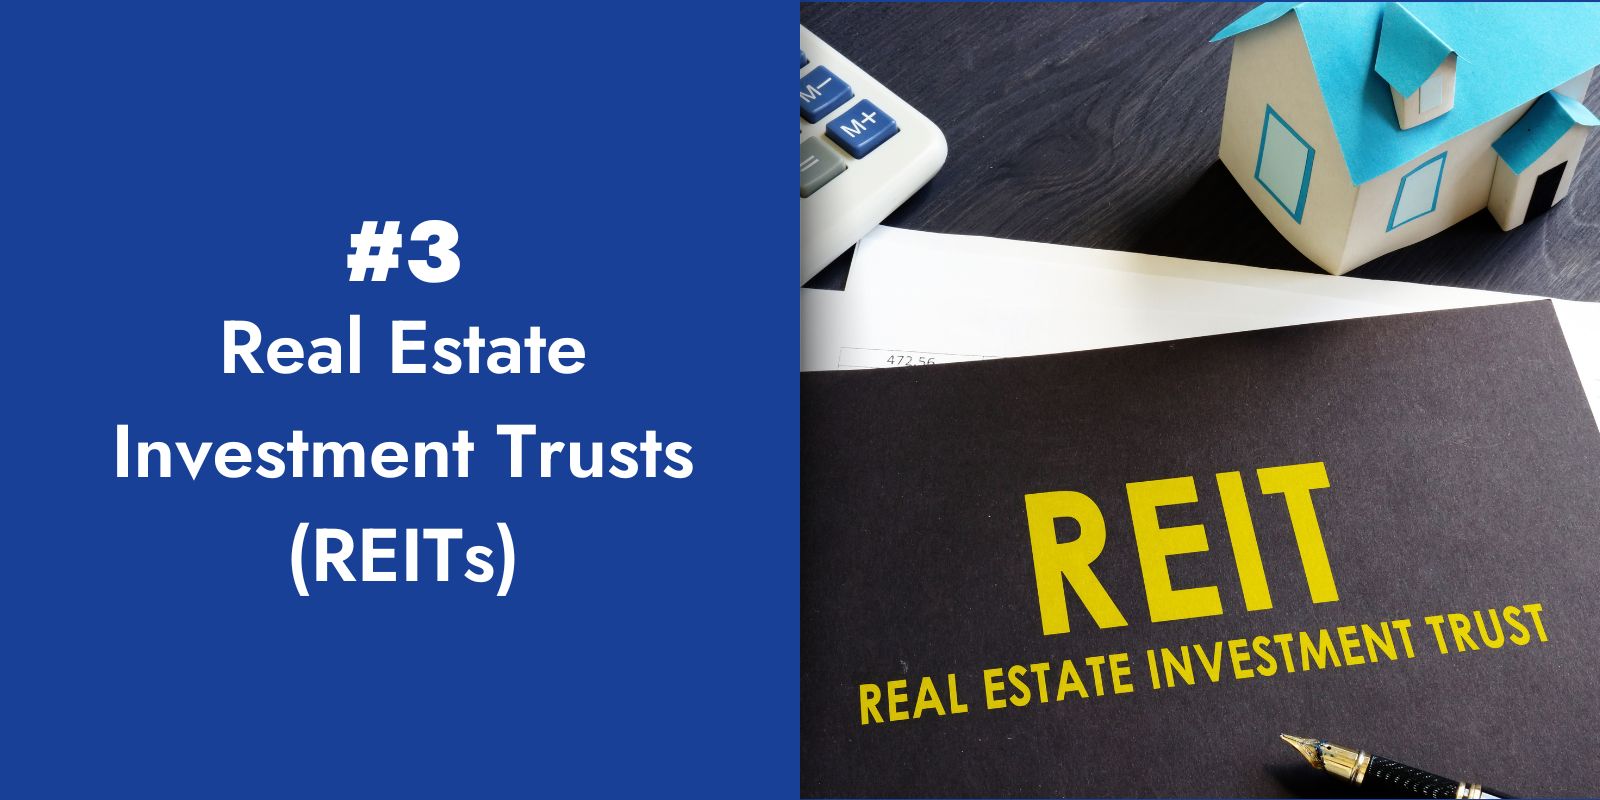 3. Real Estate Investment Trusts (REITs)